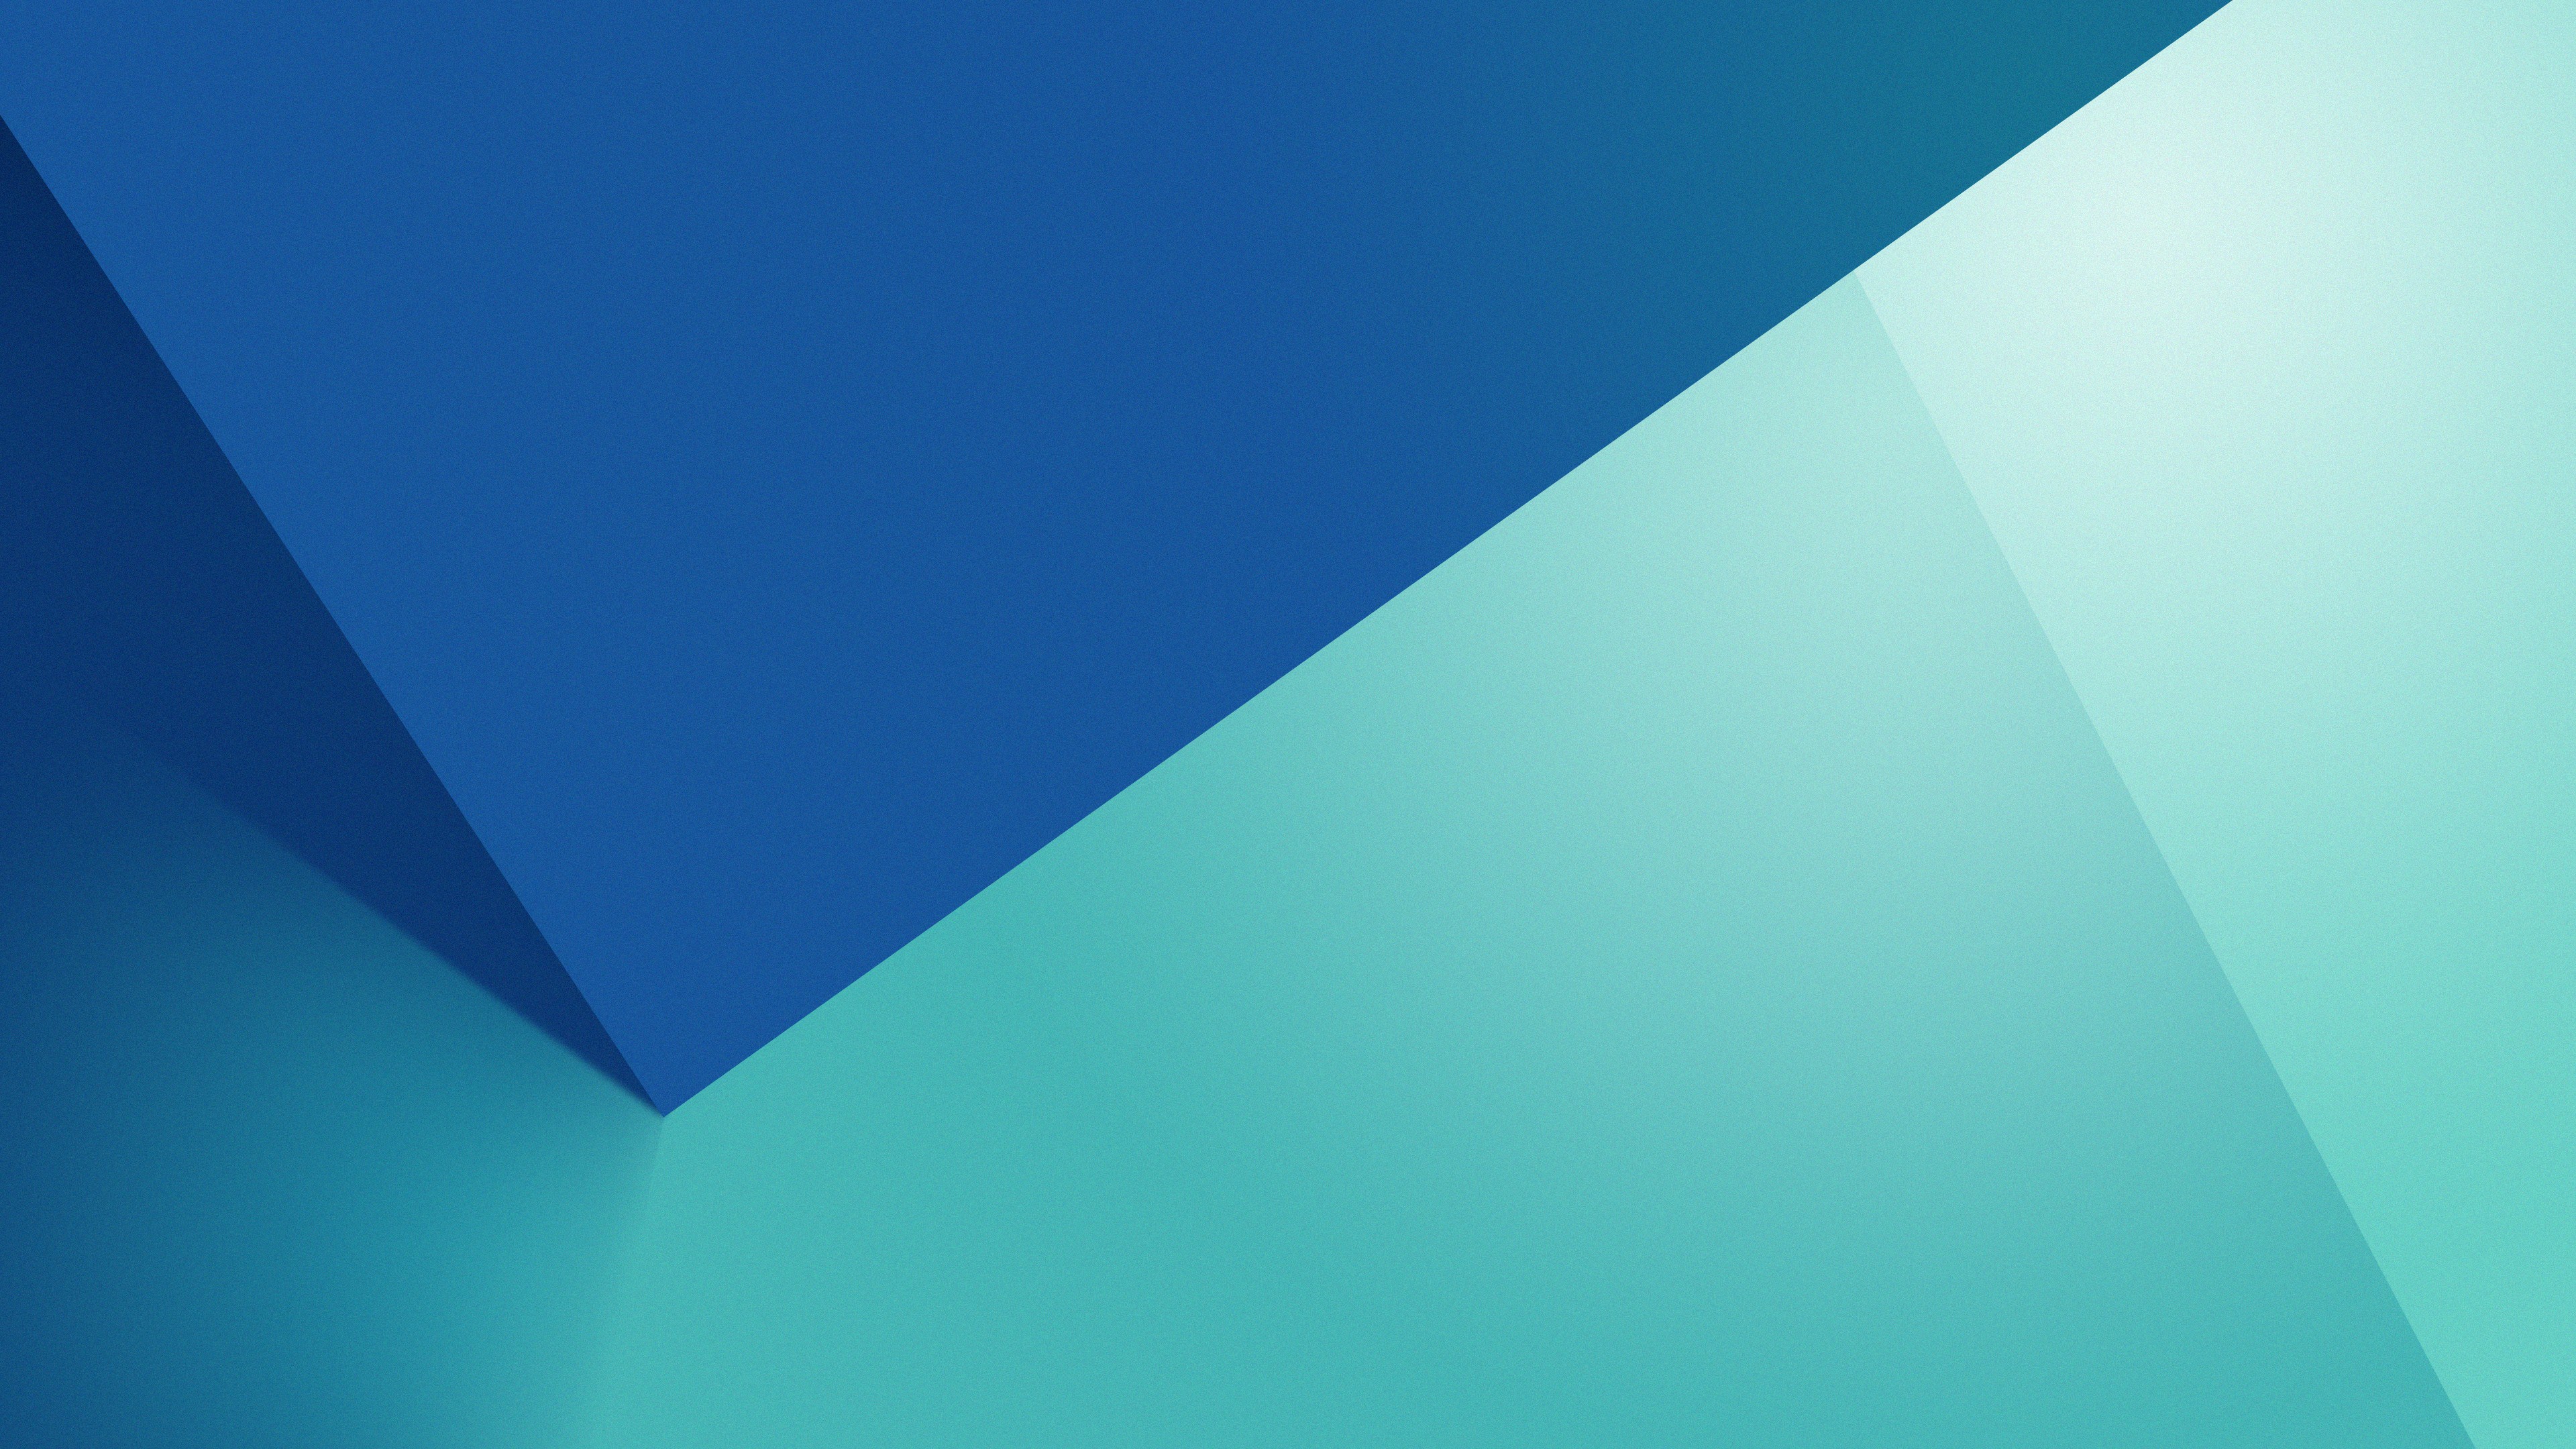 Material Design Background Hd Orice Images, Photos, Reviews